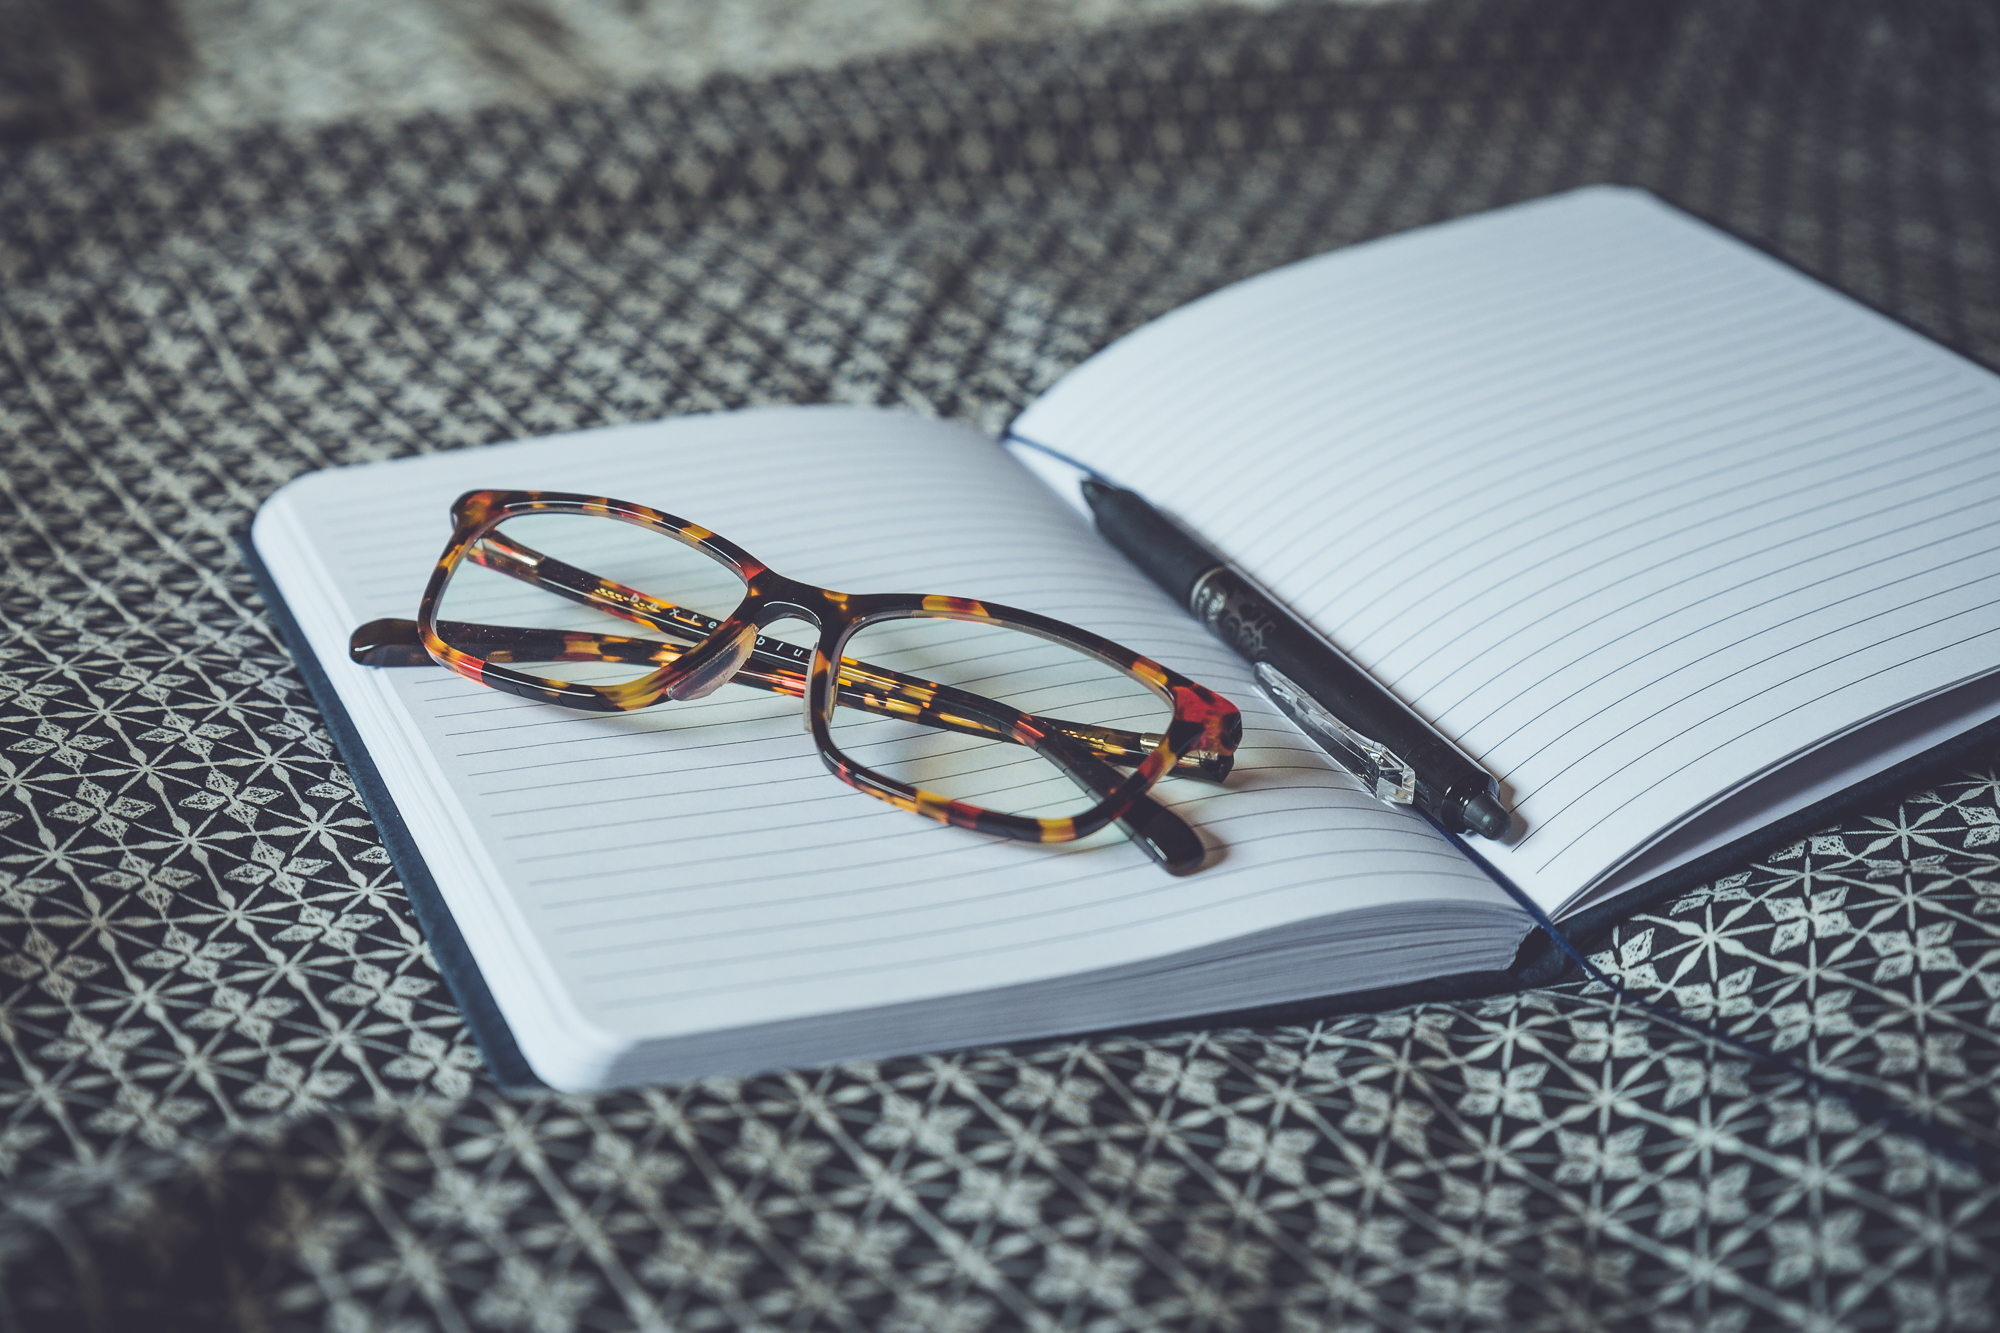 [Image description: tortoise coloured glasses and a black pen on an open lined notebook, on a navy and white patterned bedspread.]